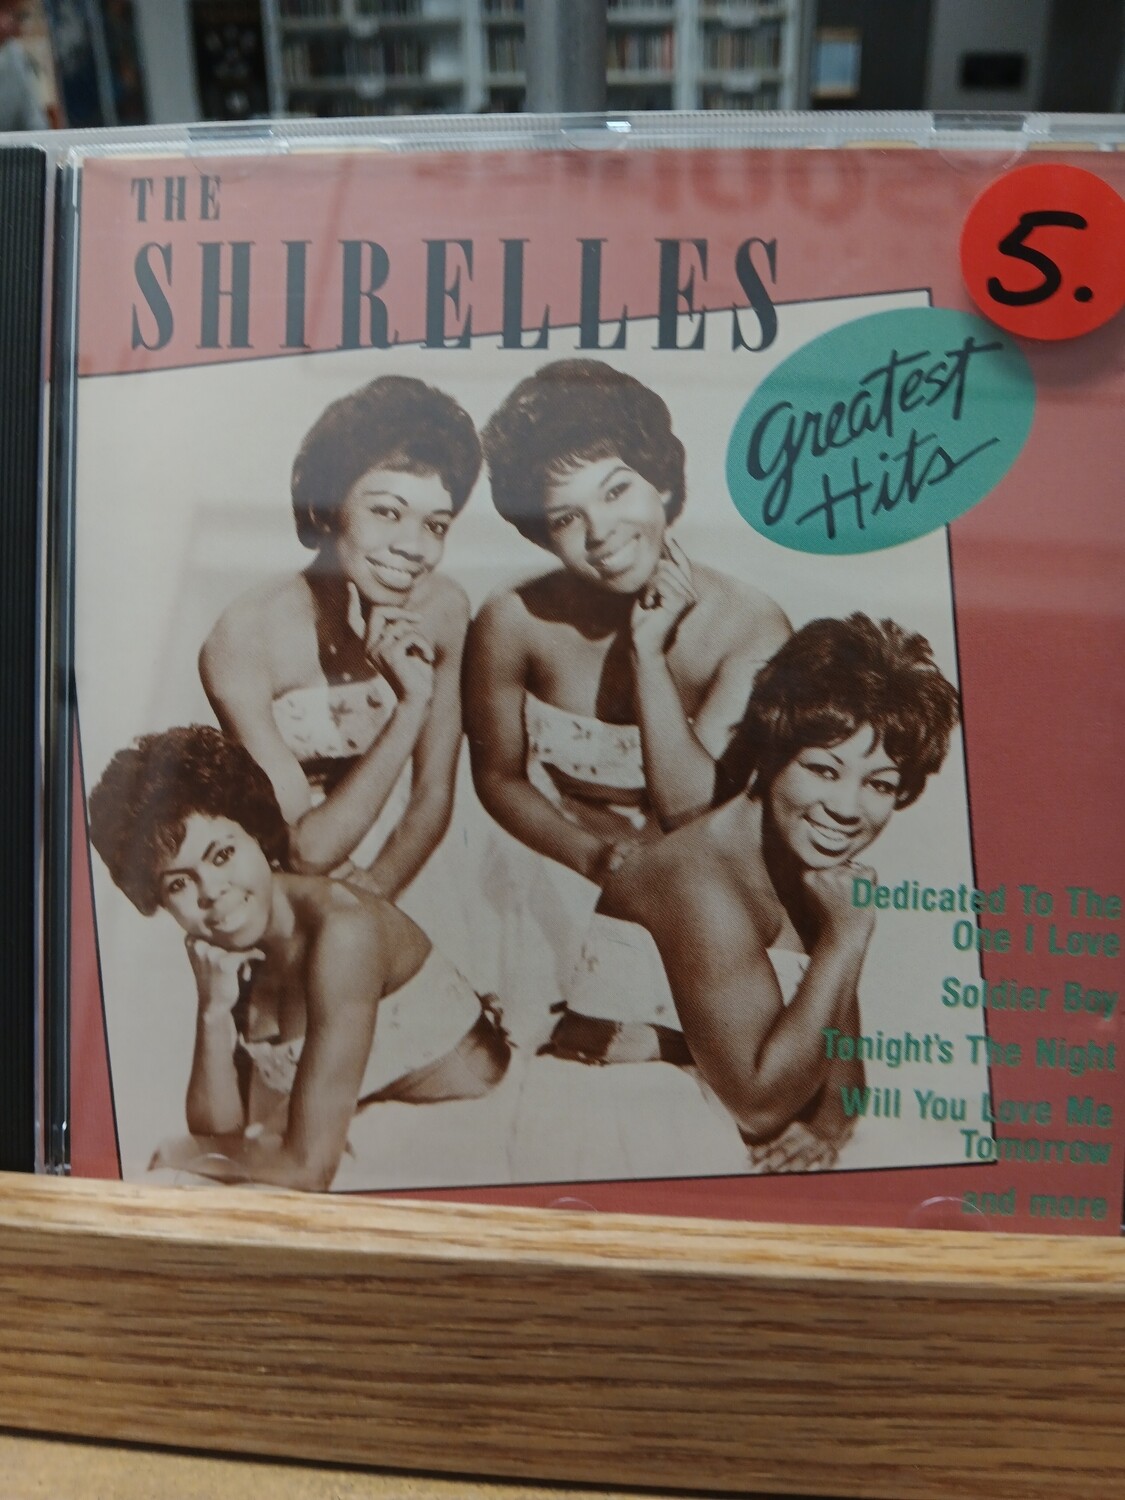 THE SHIRELLES - Greatest Hits (CD)